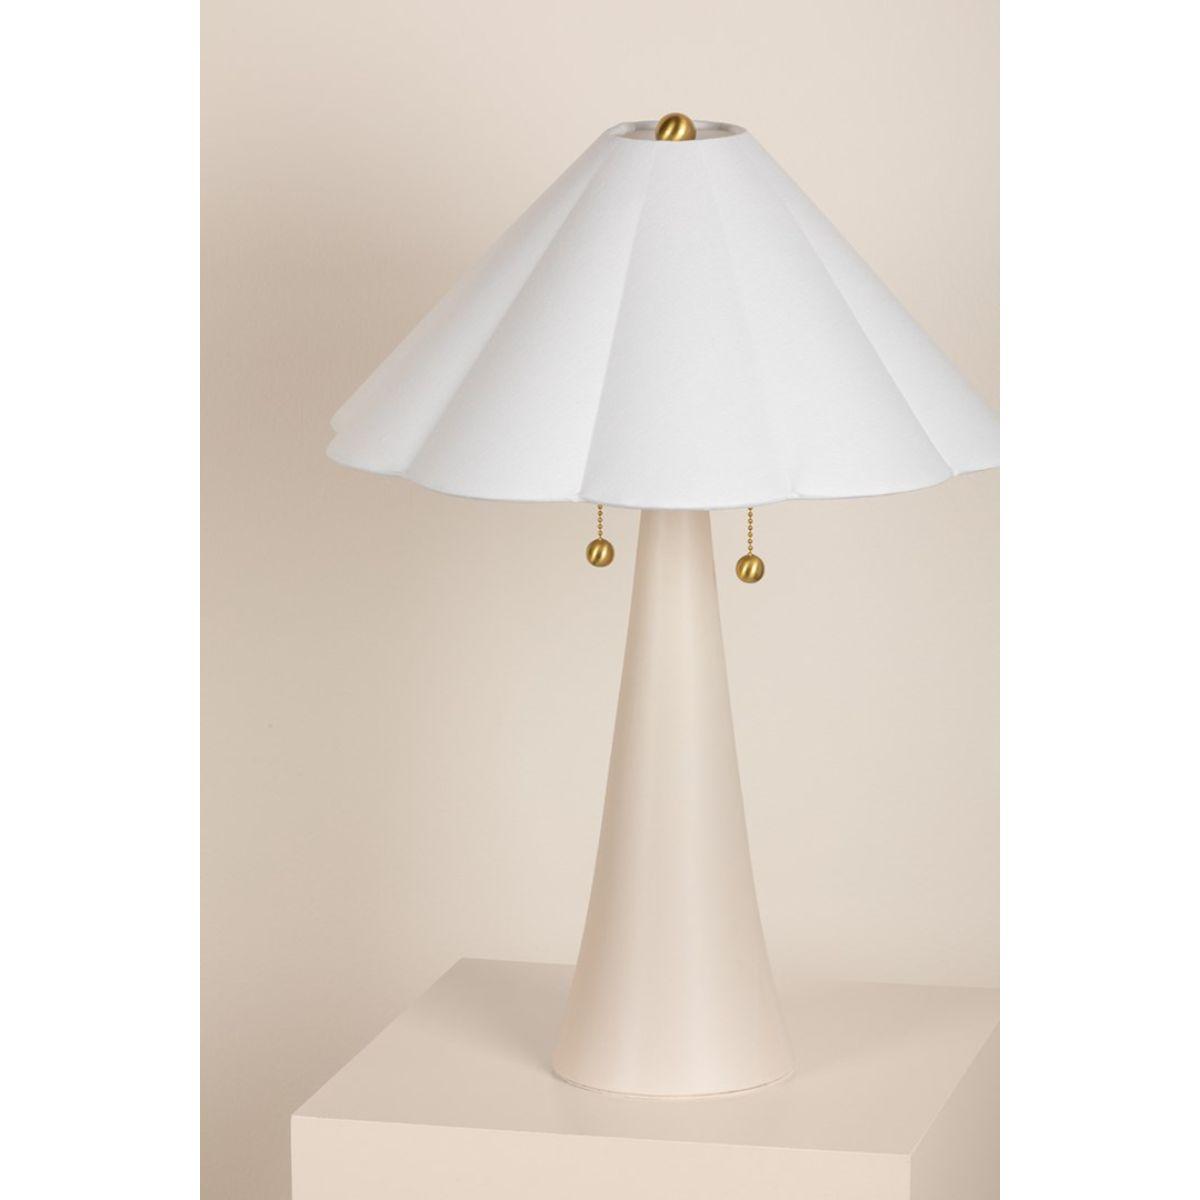 Alana 2 Lights Table Lamp Ceramic Antique Ivory with Aged Brass Accents